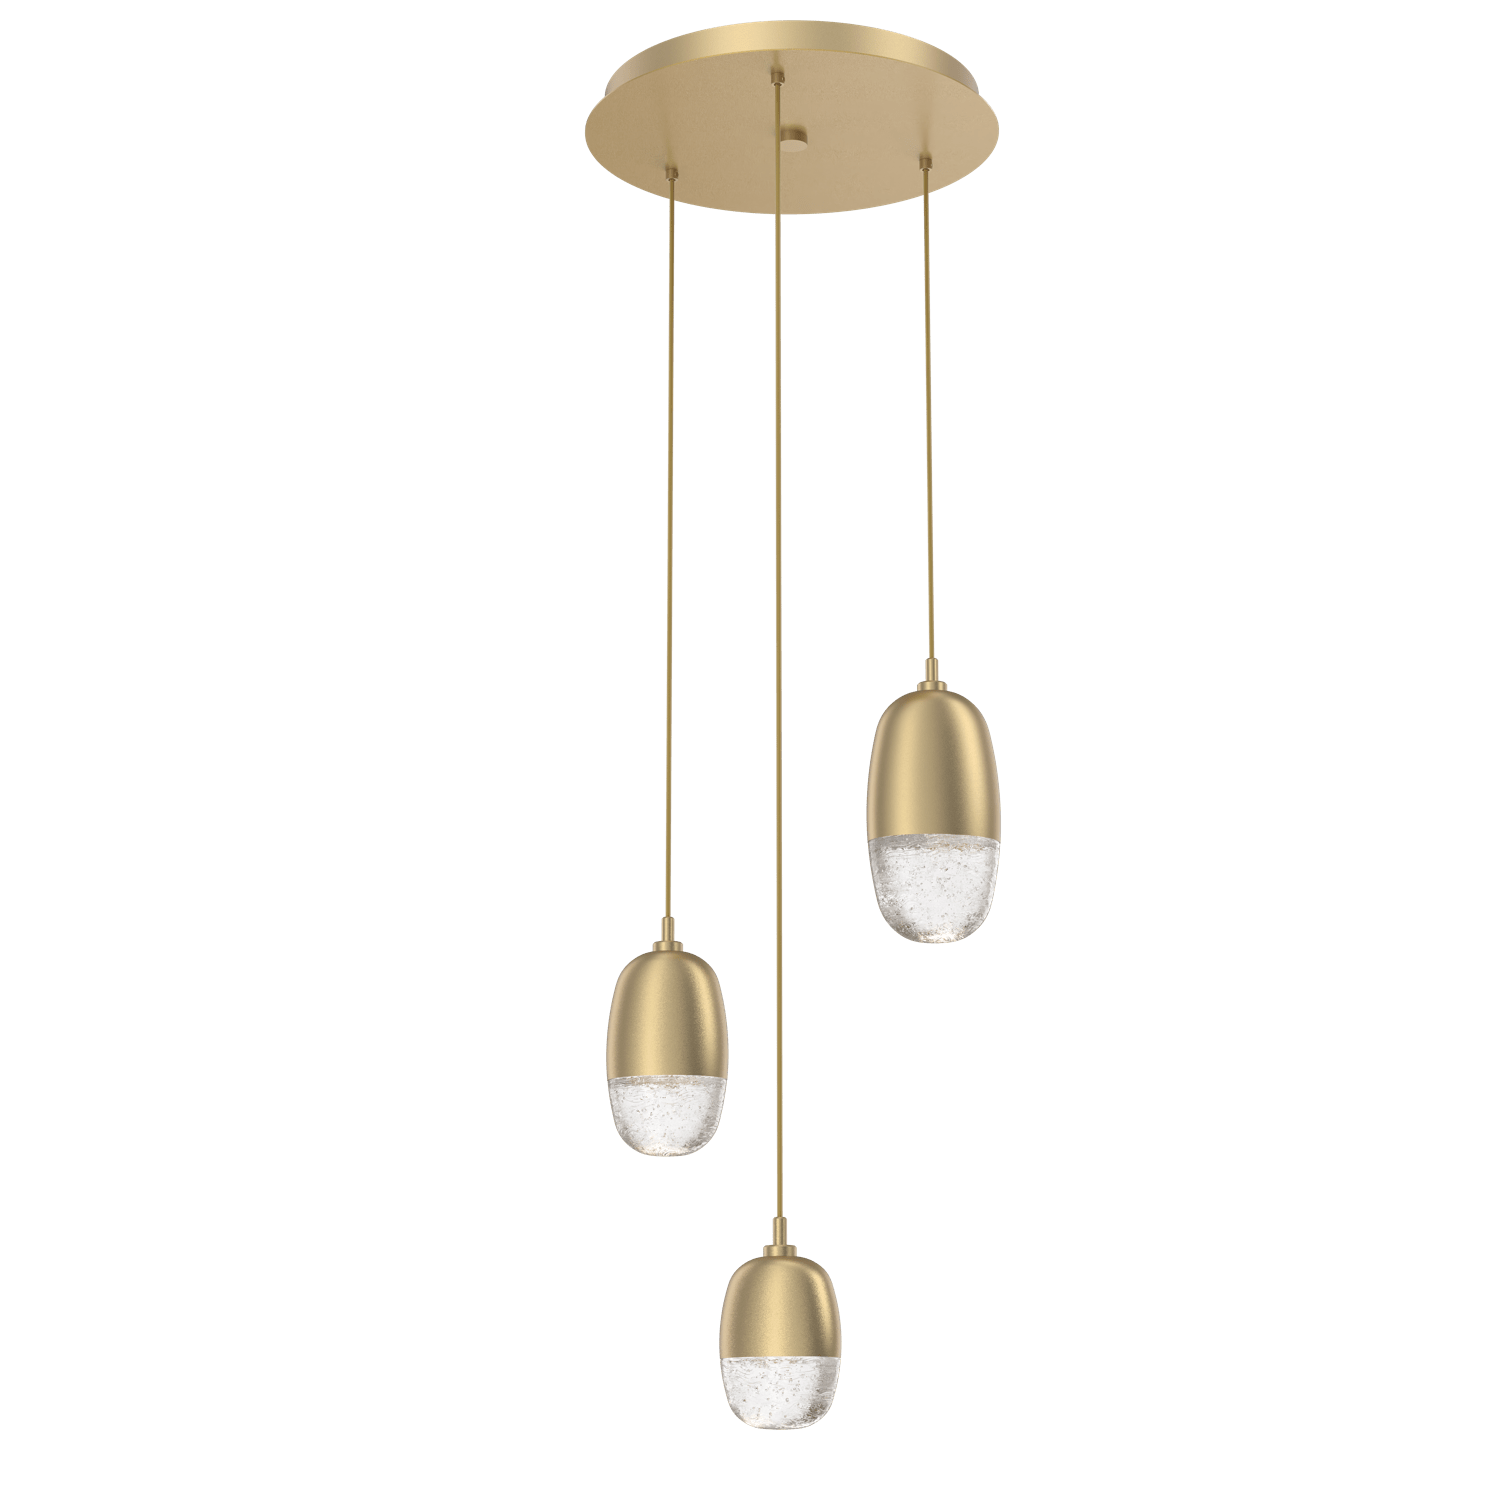 CHB0079-03-GB-Hammerton-Studio-Pebble-3-light-round-pendant-chandelier-with-gilded-brass-finish-and-clear-cast-glass-shades-and-LED-lamping